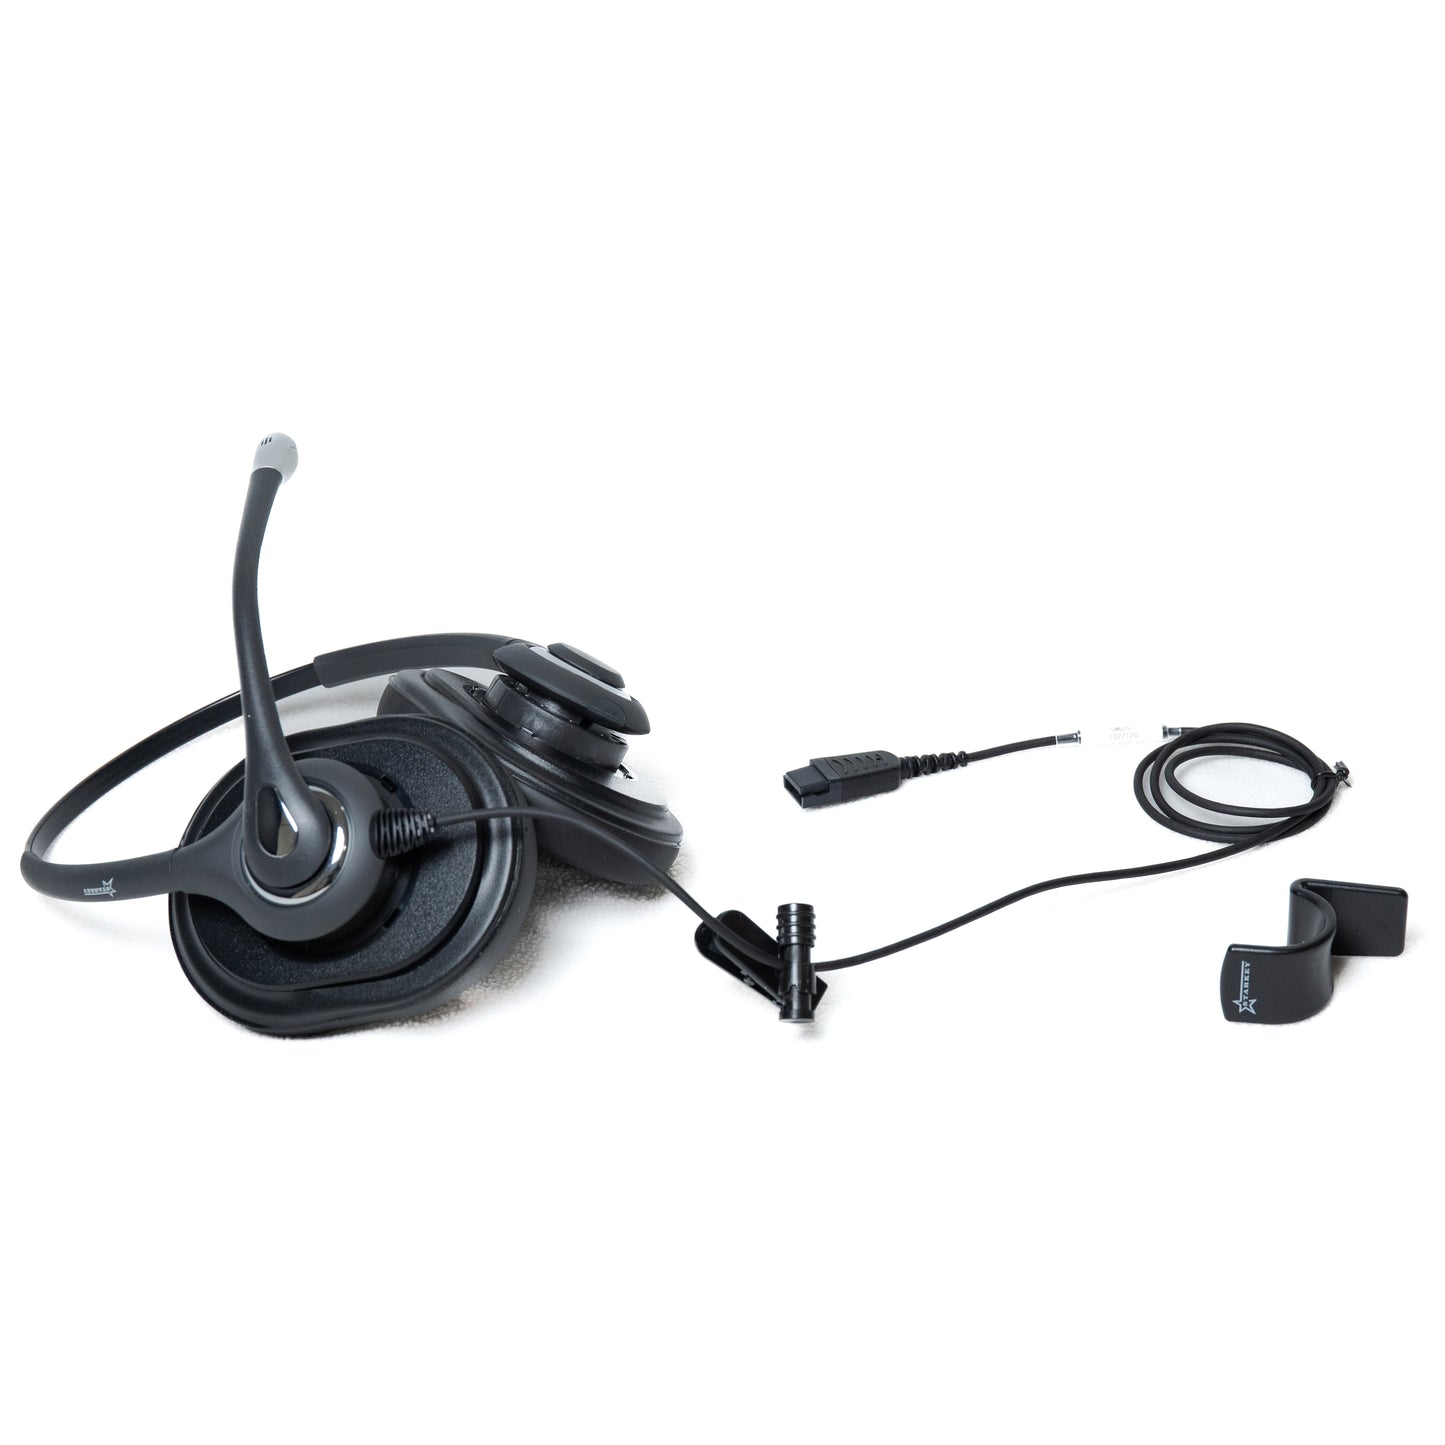 Starkey SM630-NNC Military Triple XL Ear Cushion Headset with Non-Noise Canceling (Cord sold separately.)